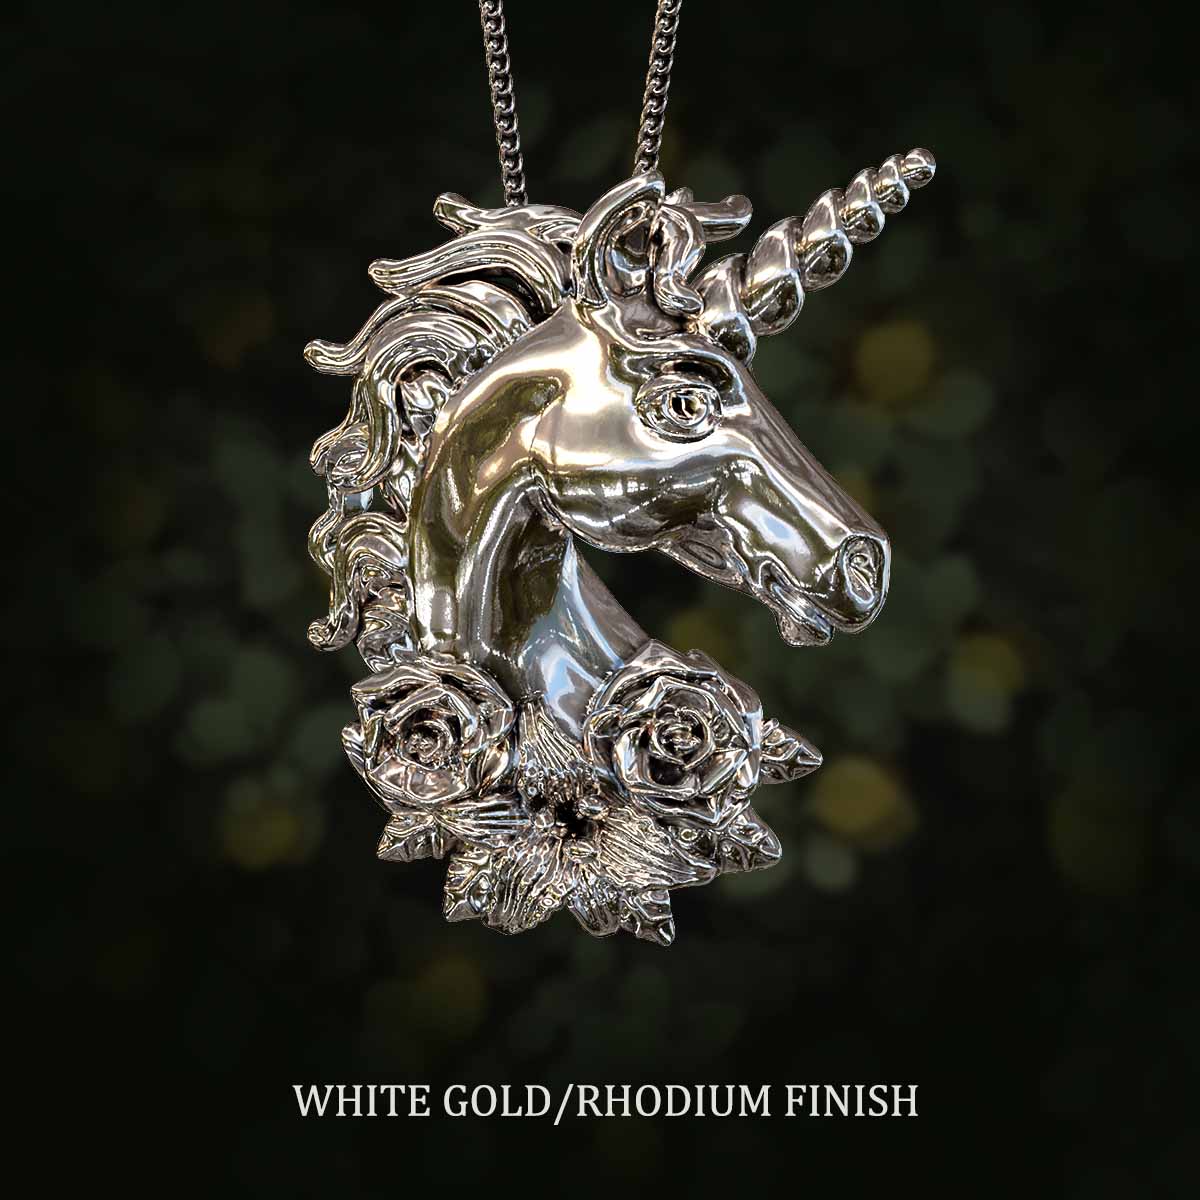     White-Gold-Rhodium-Finish-Unicorn-With-Flowers-Pendant-Jewelry-For-Necklace